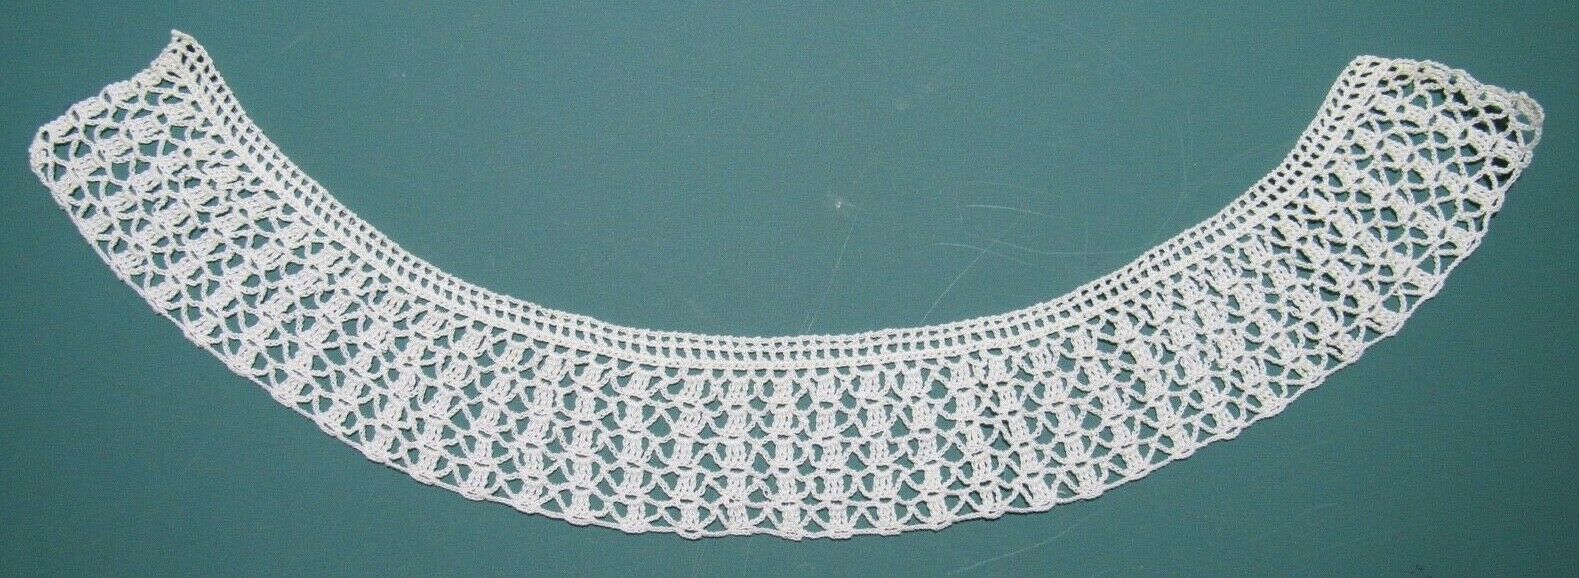 ANTIQUE VINTAGE LACE COLLAR HAND CROCHETED